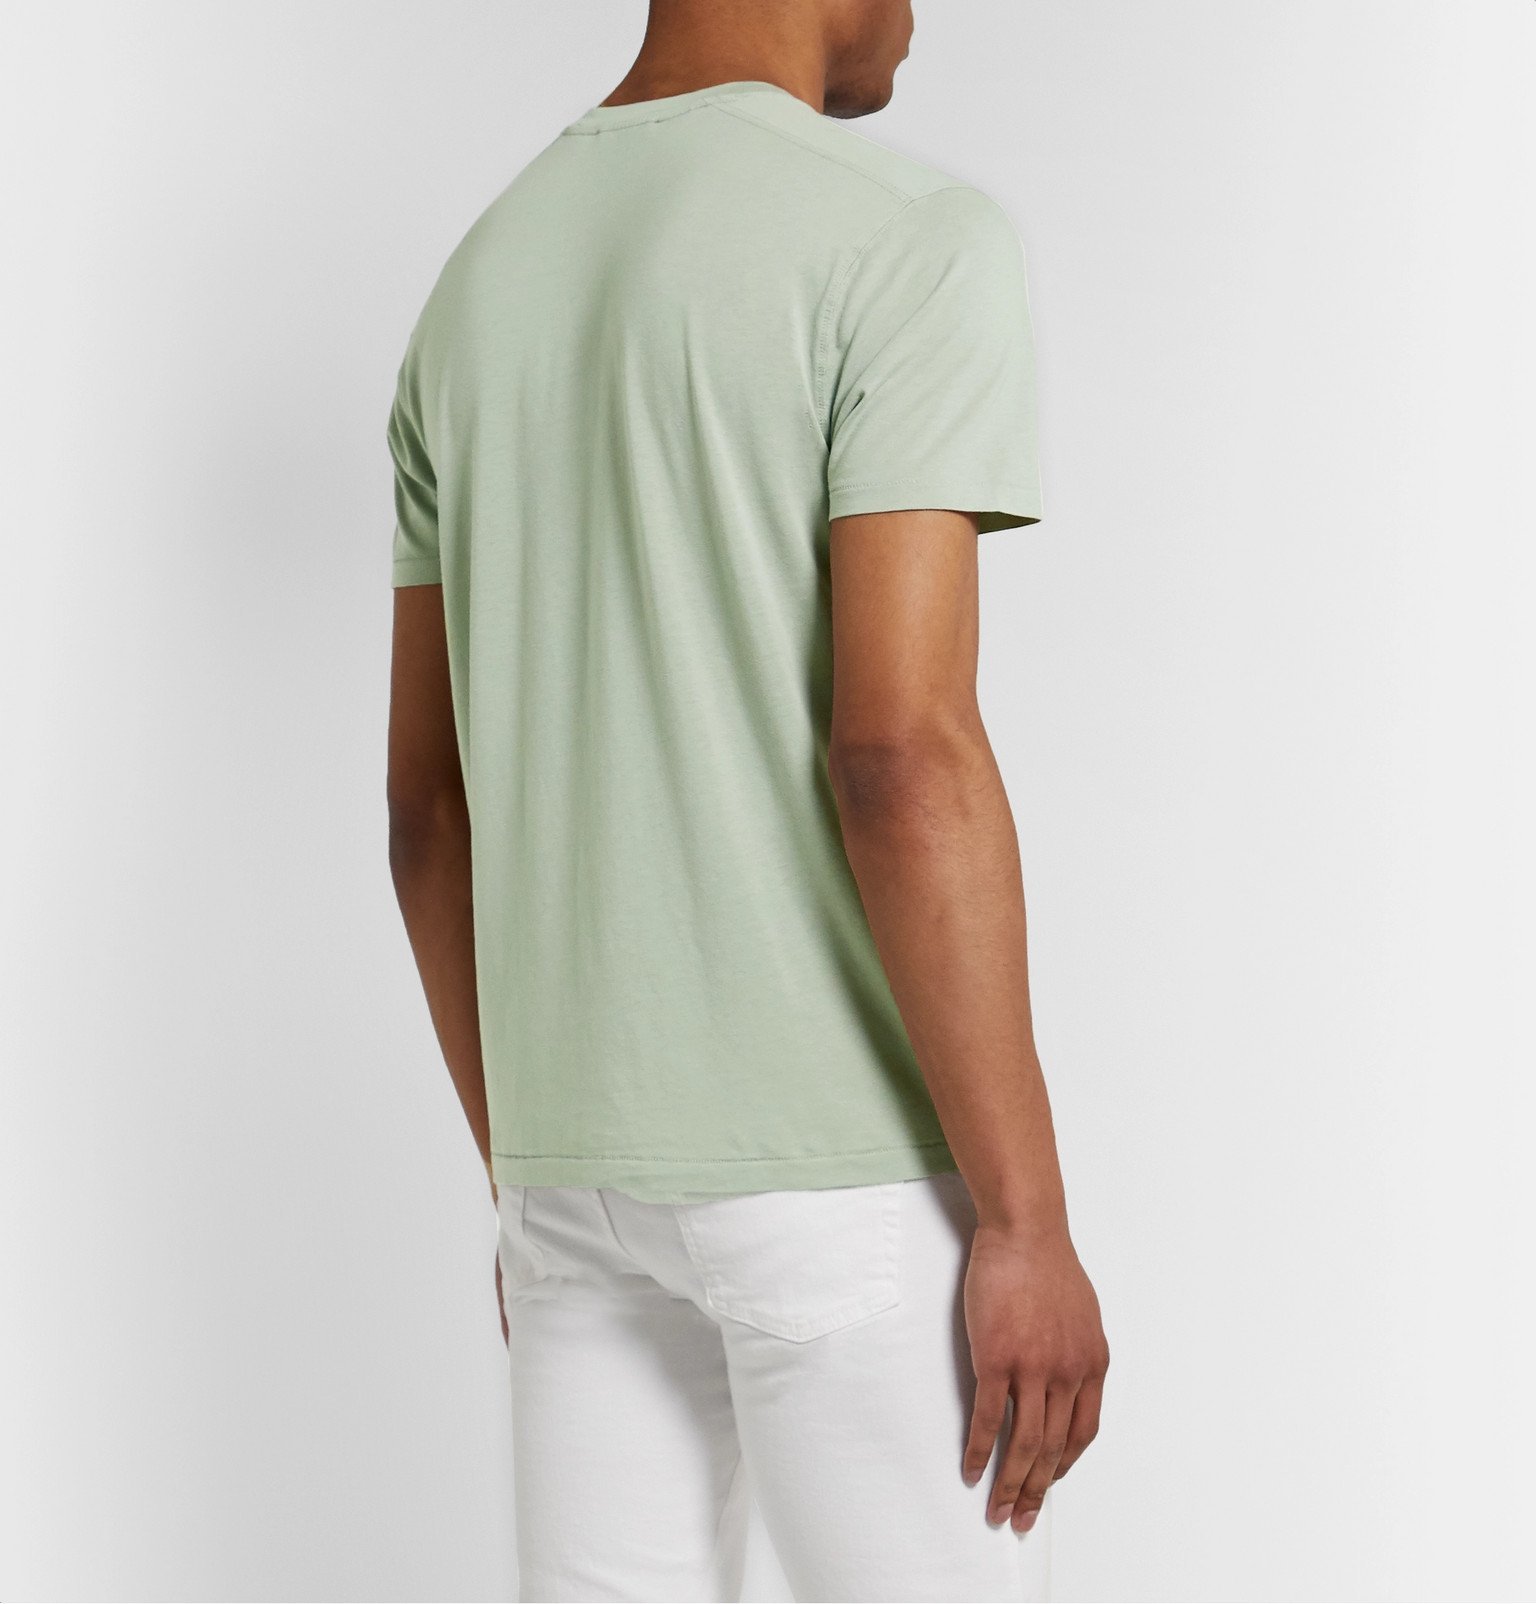 TOM FORD - Slim-Fit Lyocell and Cotton-Blend Jersey T-Shirt 